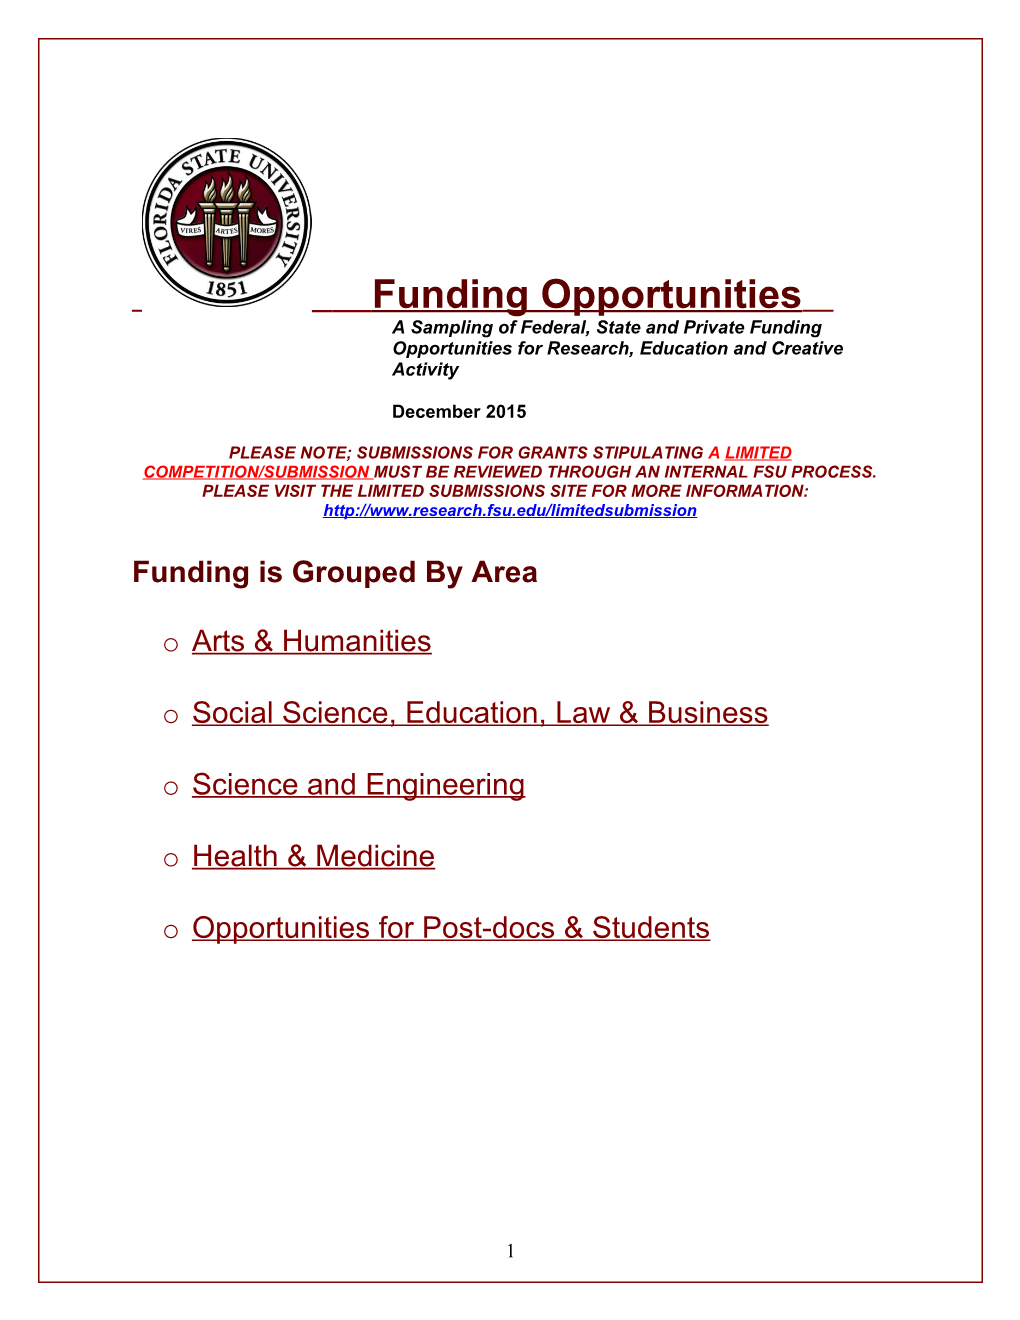 A Sampling of Federal, State and Private Funding Opportunities for Research, Education